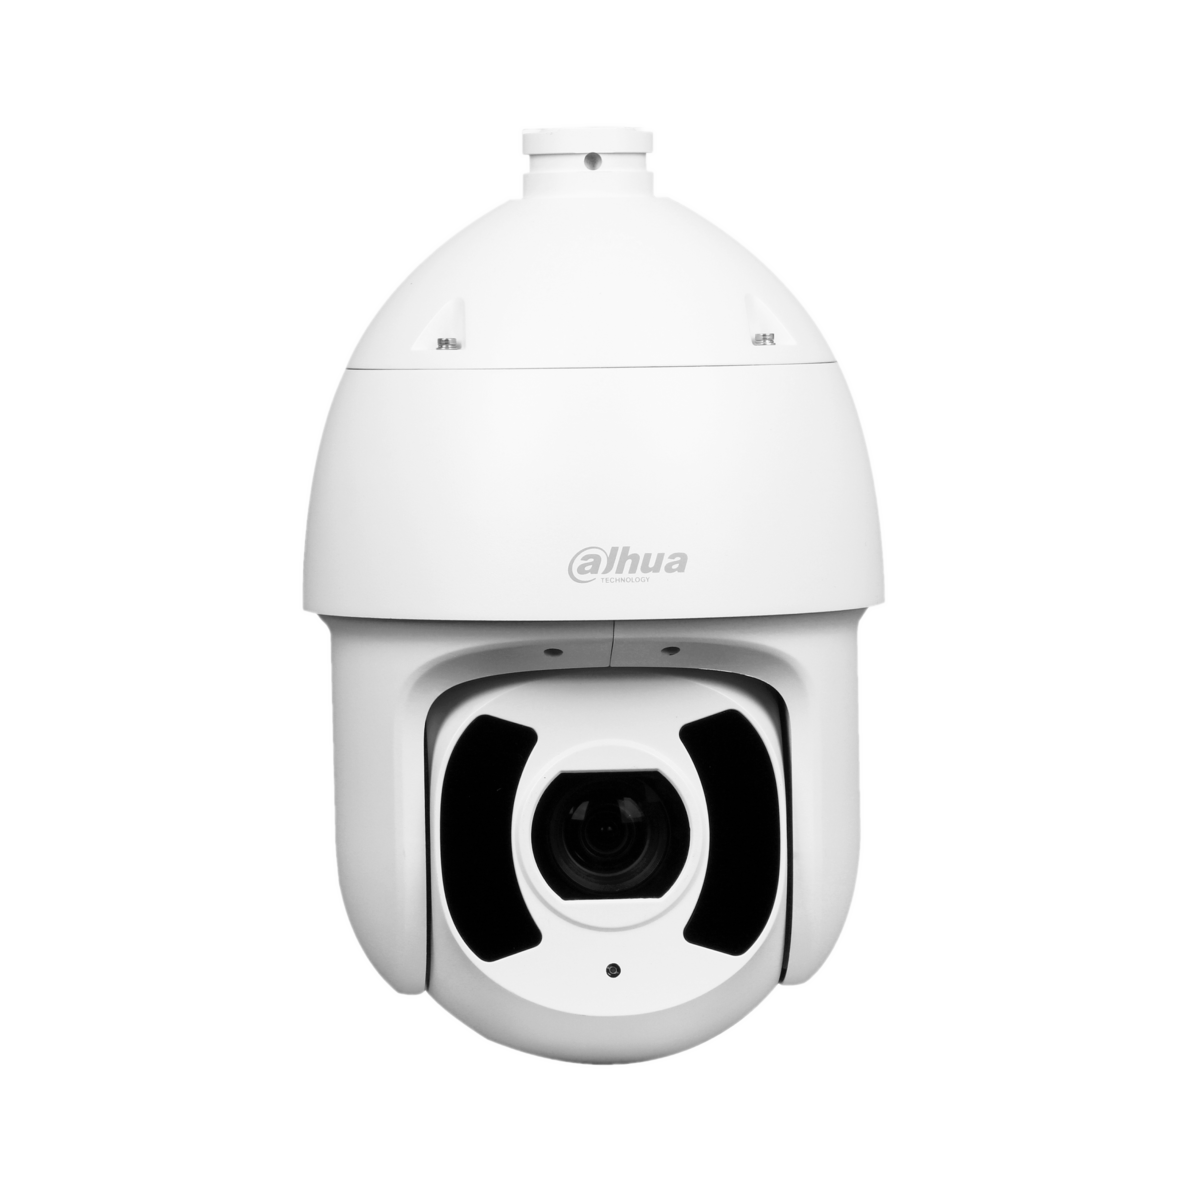 WIZSENSE SERIES IP CAMERA WHITE AI AUTO TRACKING 2MP/1080P H.264/4+/5/5+ SPEED DOME PTZ 120 WDR METAL 3.95-177.7MMMOTORISED LENS 45X ZOOM STARLIGHT IR 250M POE+ IP67 WITHOUT MIC AUDIO IN AUDIO OUT 7 x ALARM IN 2 x ALARM OUT SUPPORT UP TO 512GB SDIK10 24VDC